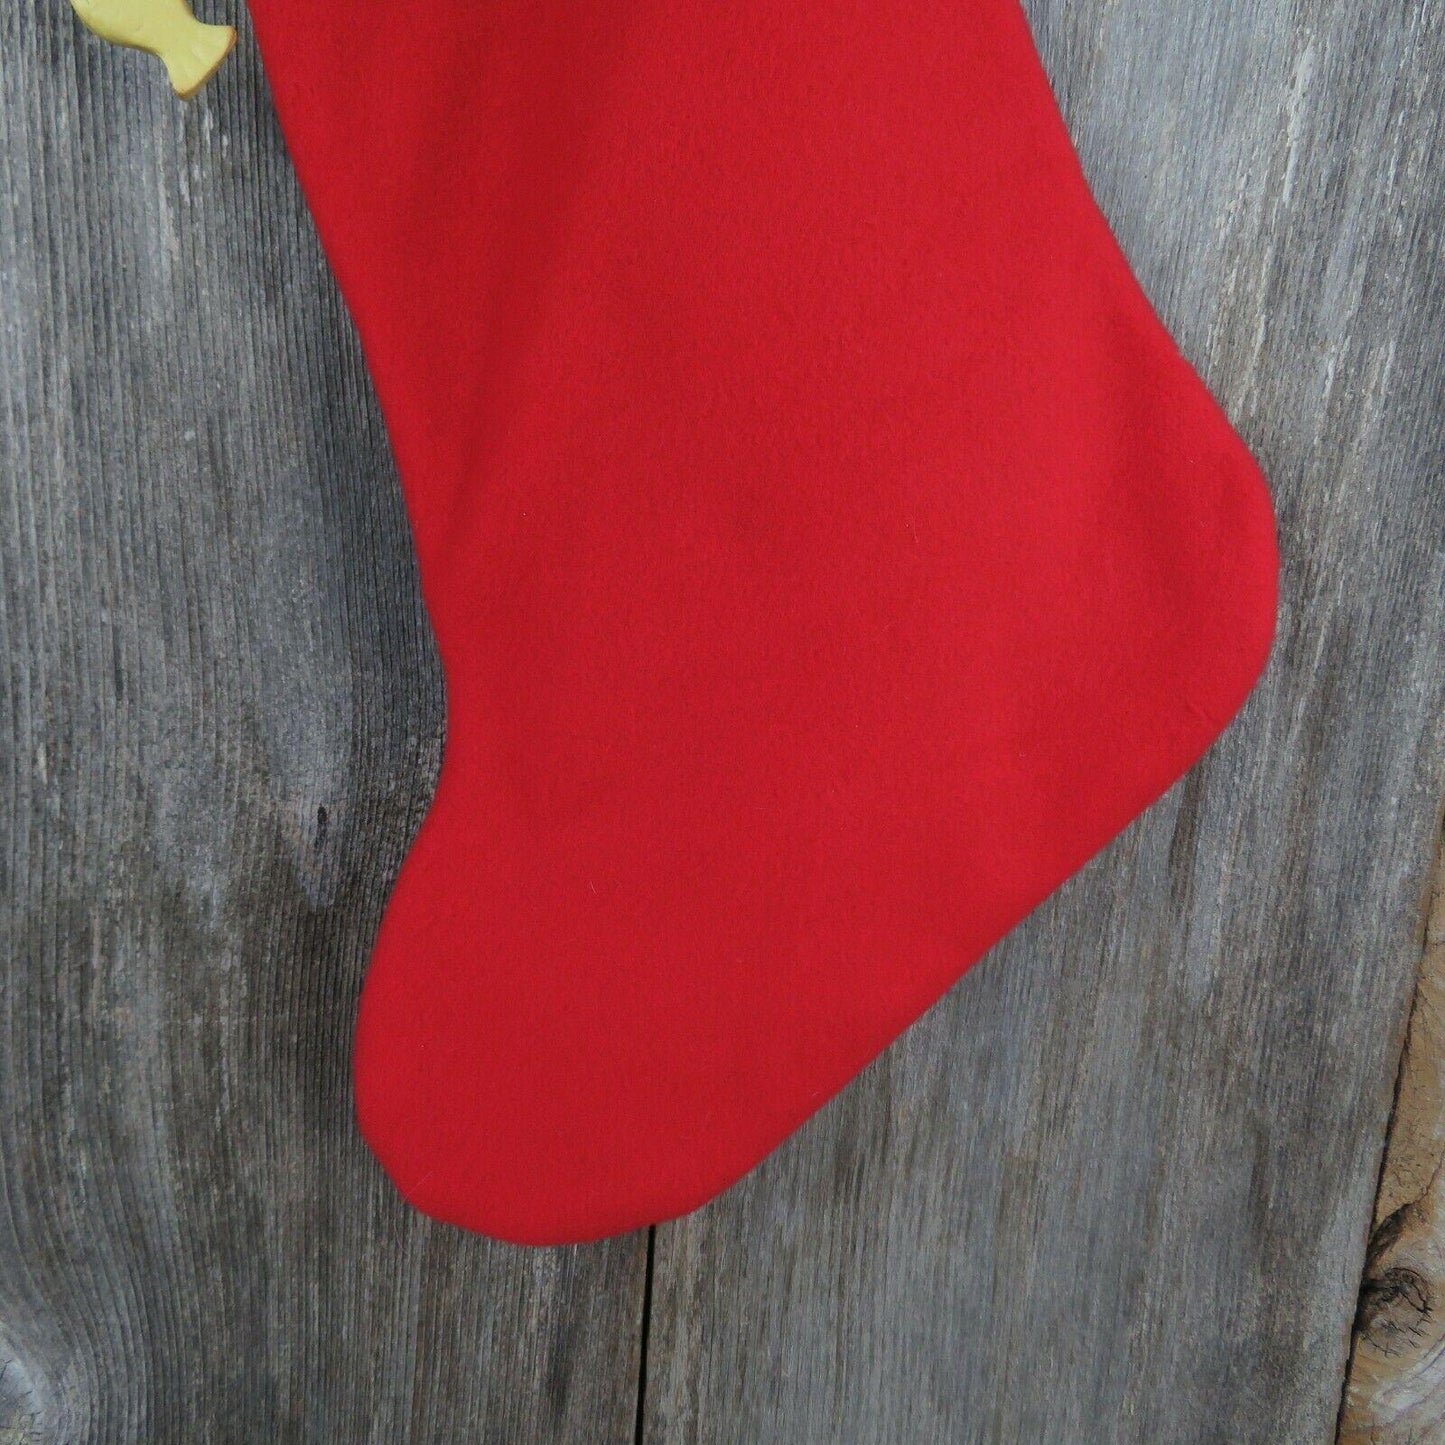 Nice Kitty Christmas Stocking Cat Mouse Fish Bells Fleece Green Red Pet